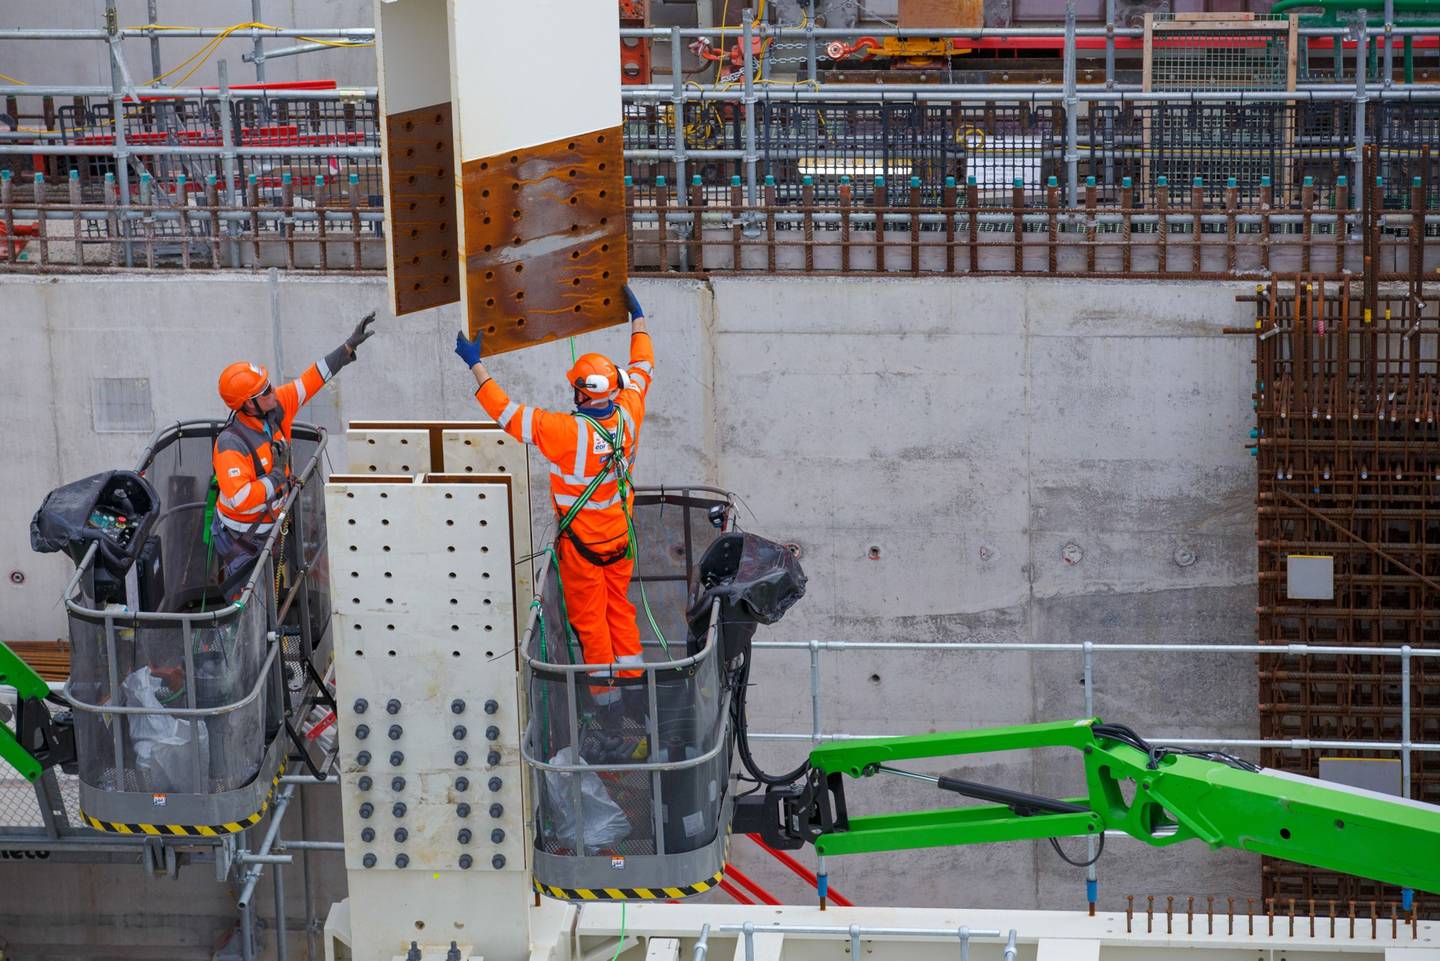 Contractors move a steel joist into position at Hinkley Point C nuclear power station construction site, near Bridgwater U.K., on Thursday, Sept. 23, 2021.